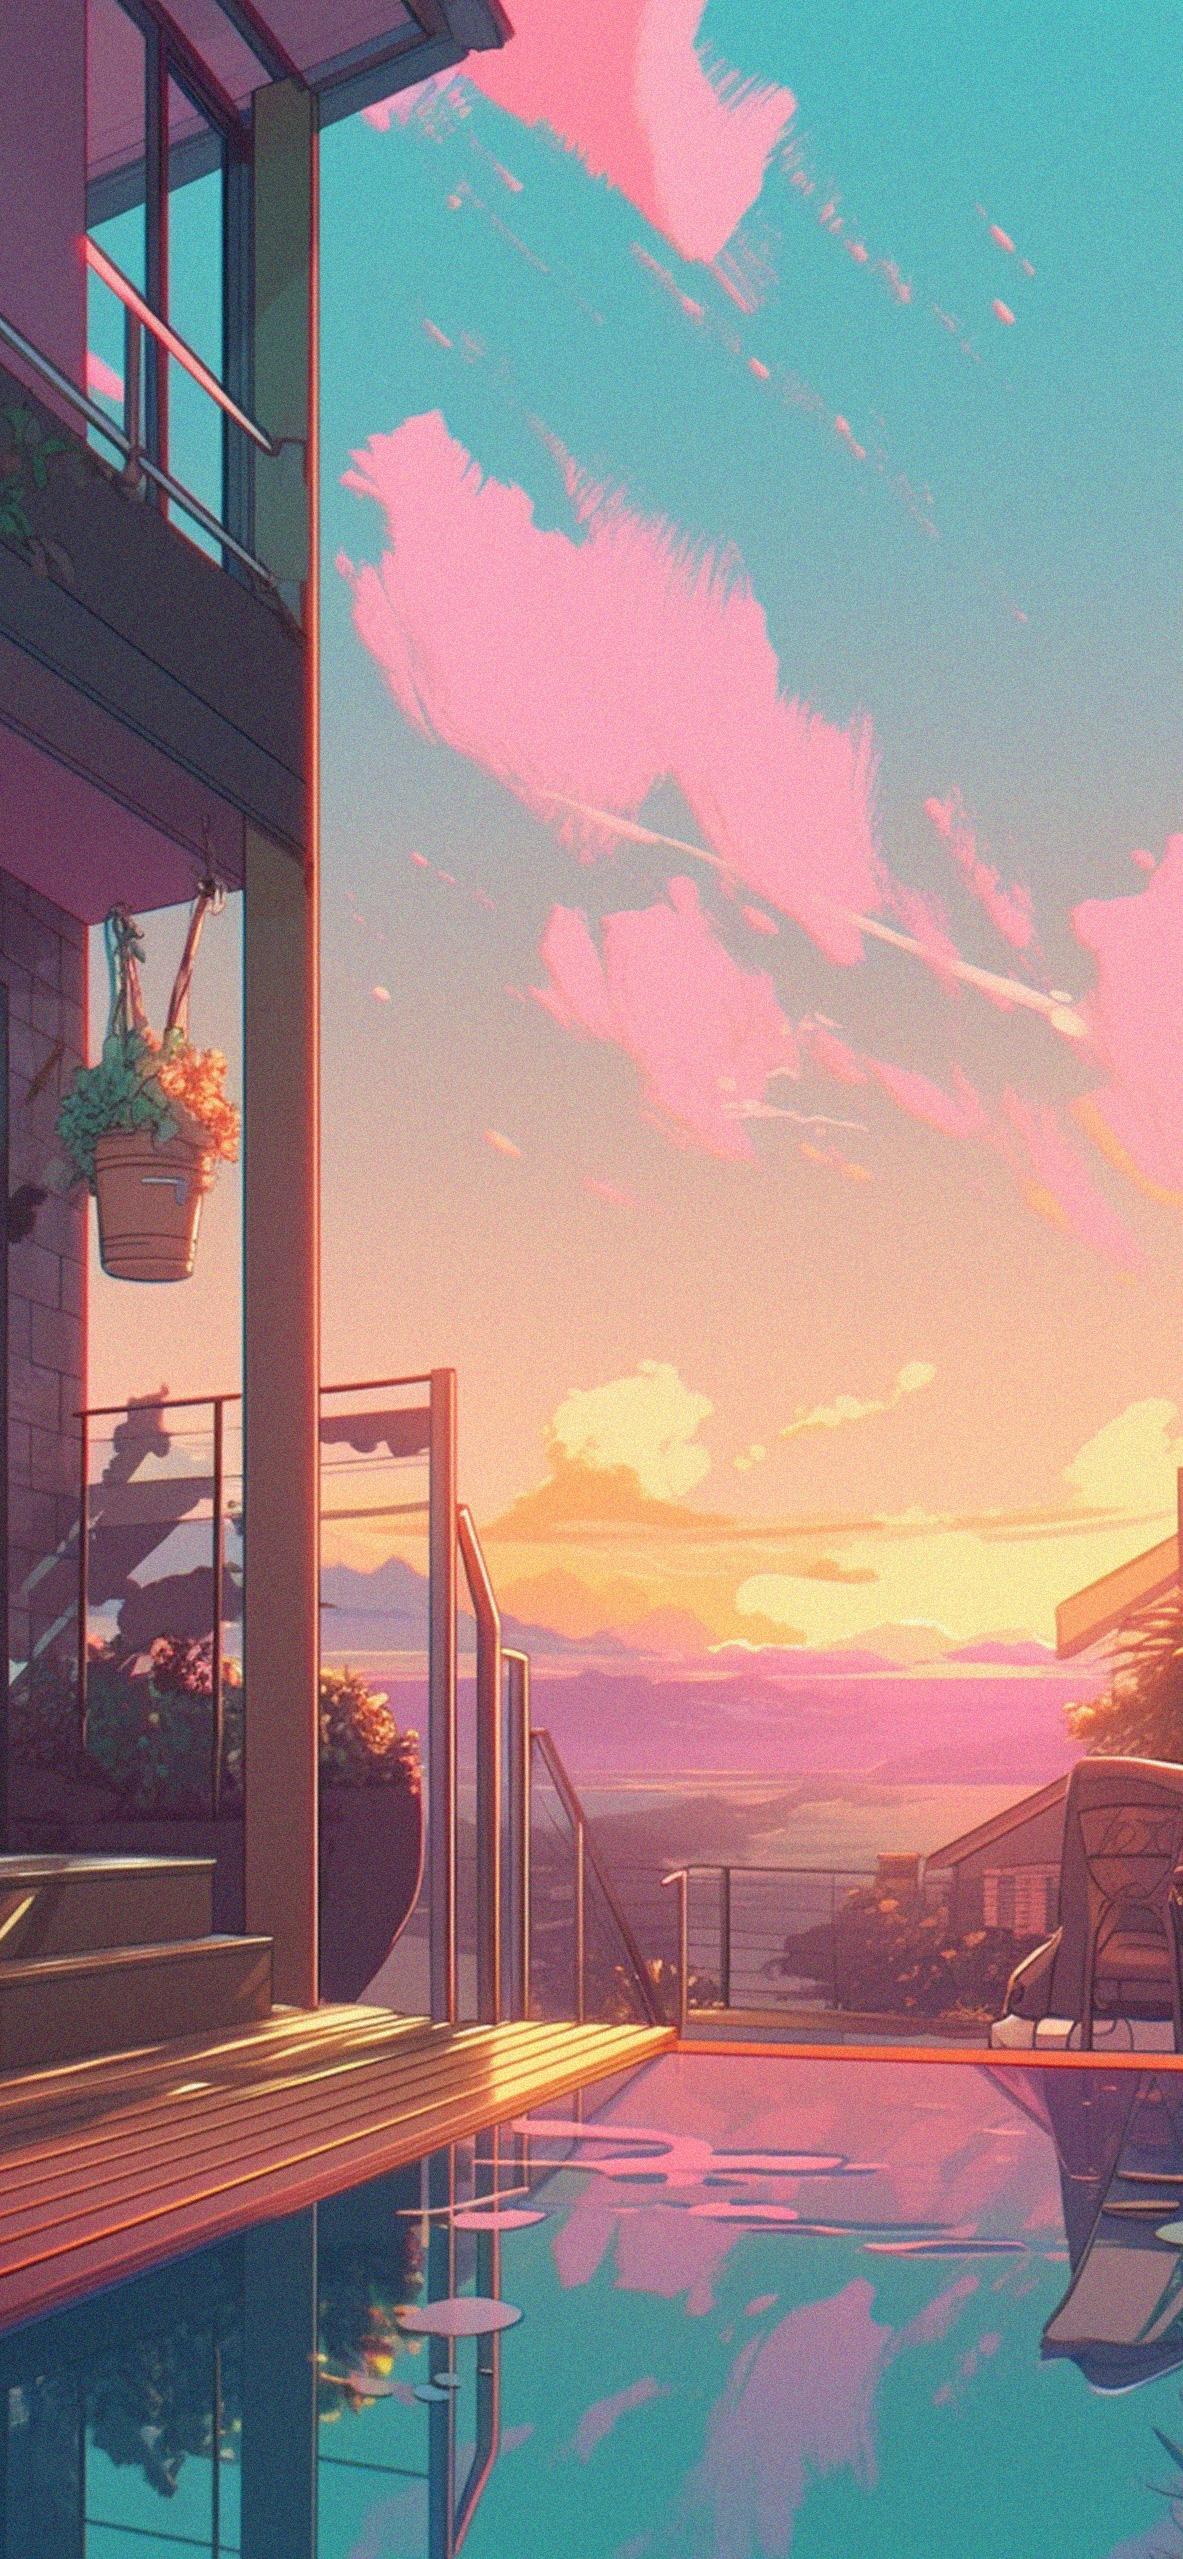 Aesthetic Anime Wallpapers - Top 35 Best Aesthetic Anime Wallpapers Download